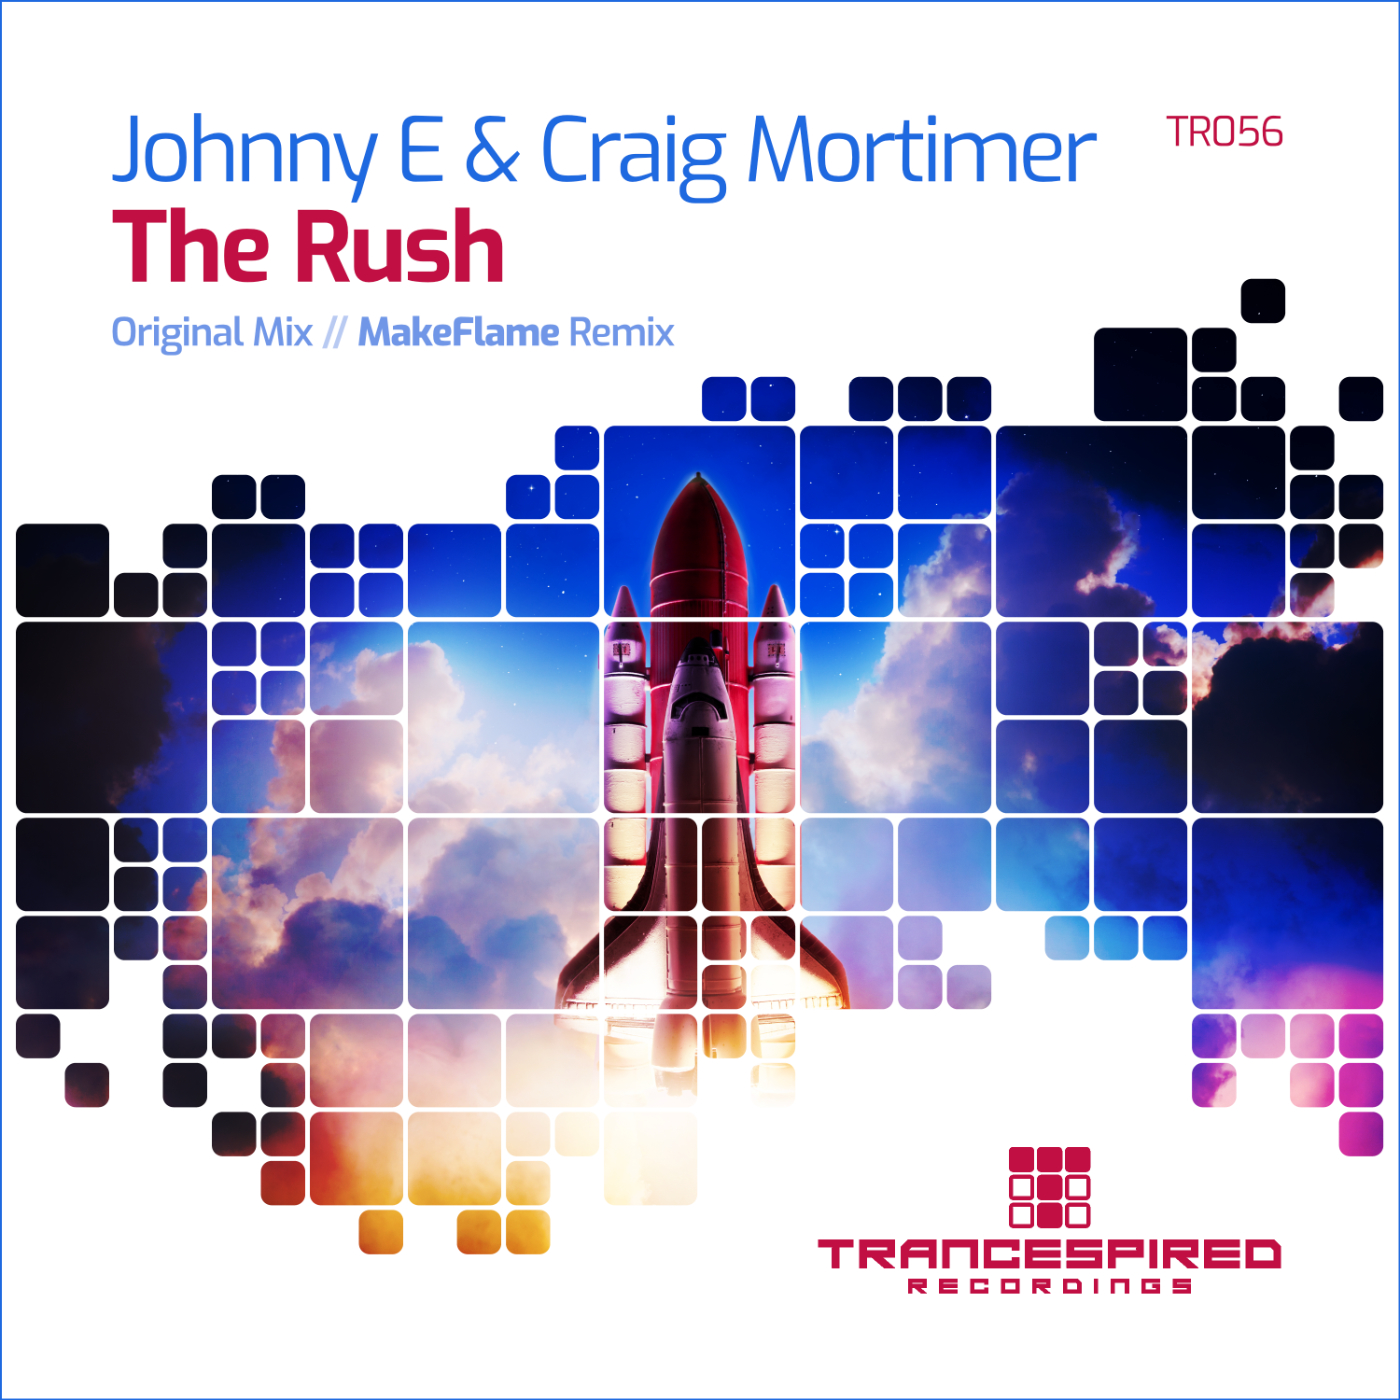 Johnny E and Craig Mortimer presents The Rush on Trancespired Recordings